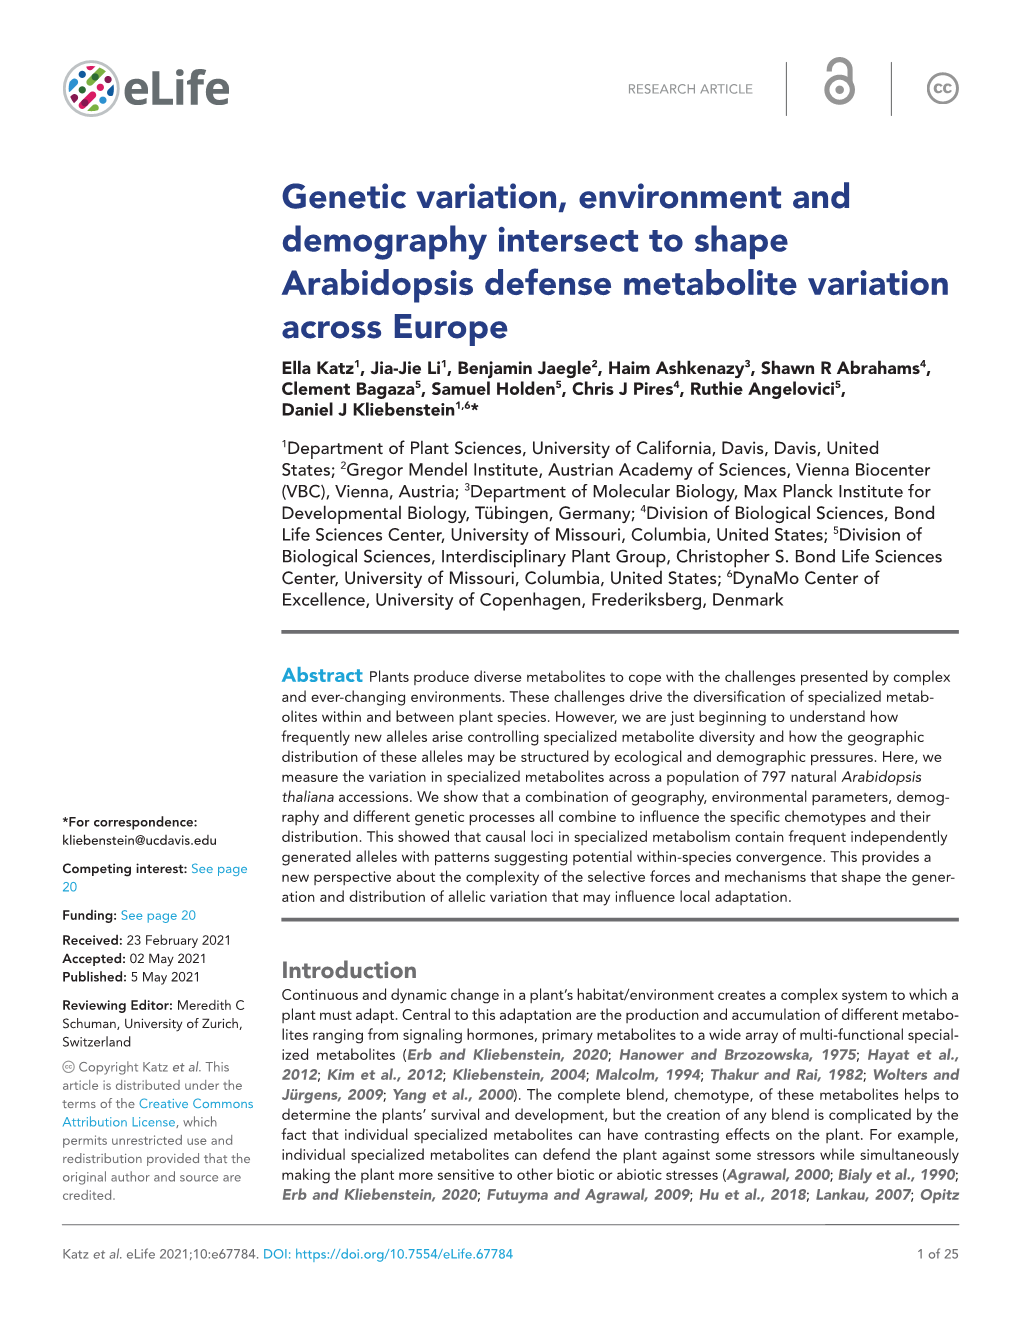 Genetic Variation, Environment and Demography Intersect to Shape